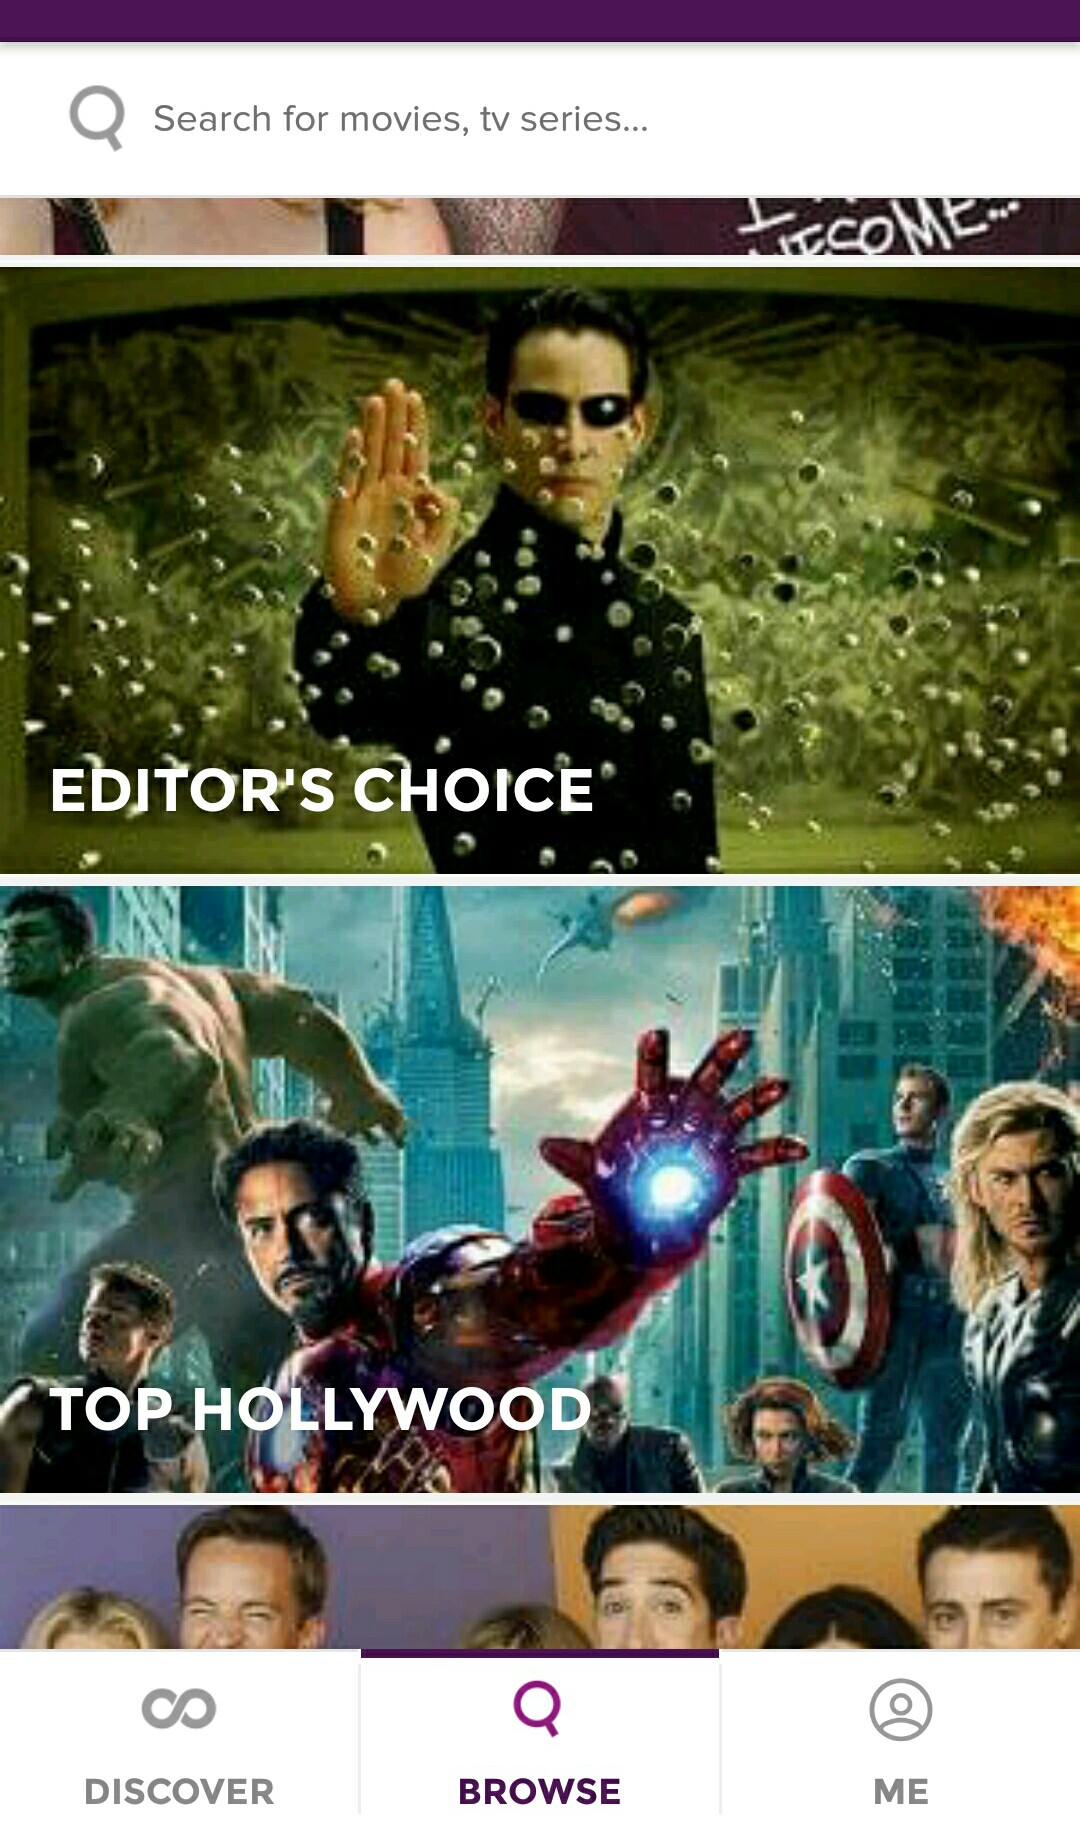 Favorite movies like “The Matrix Trilogy” and “The Avengers” series are made available on Hooq.